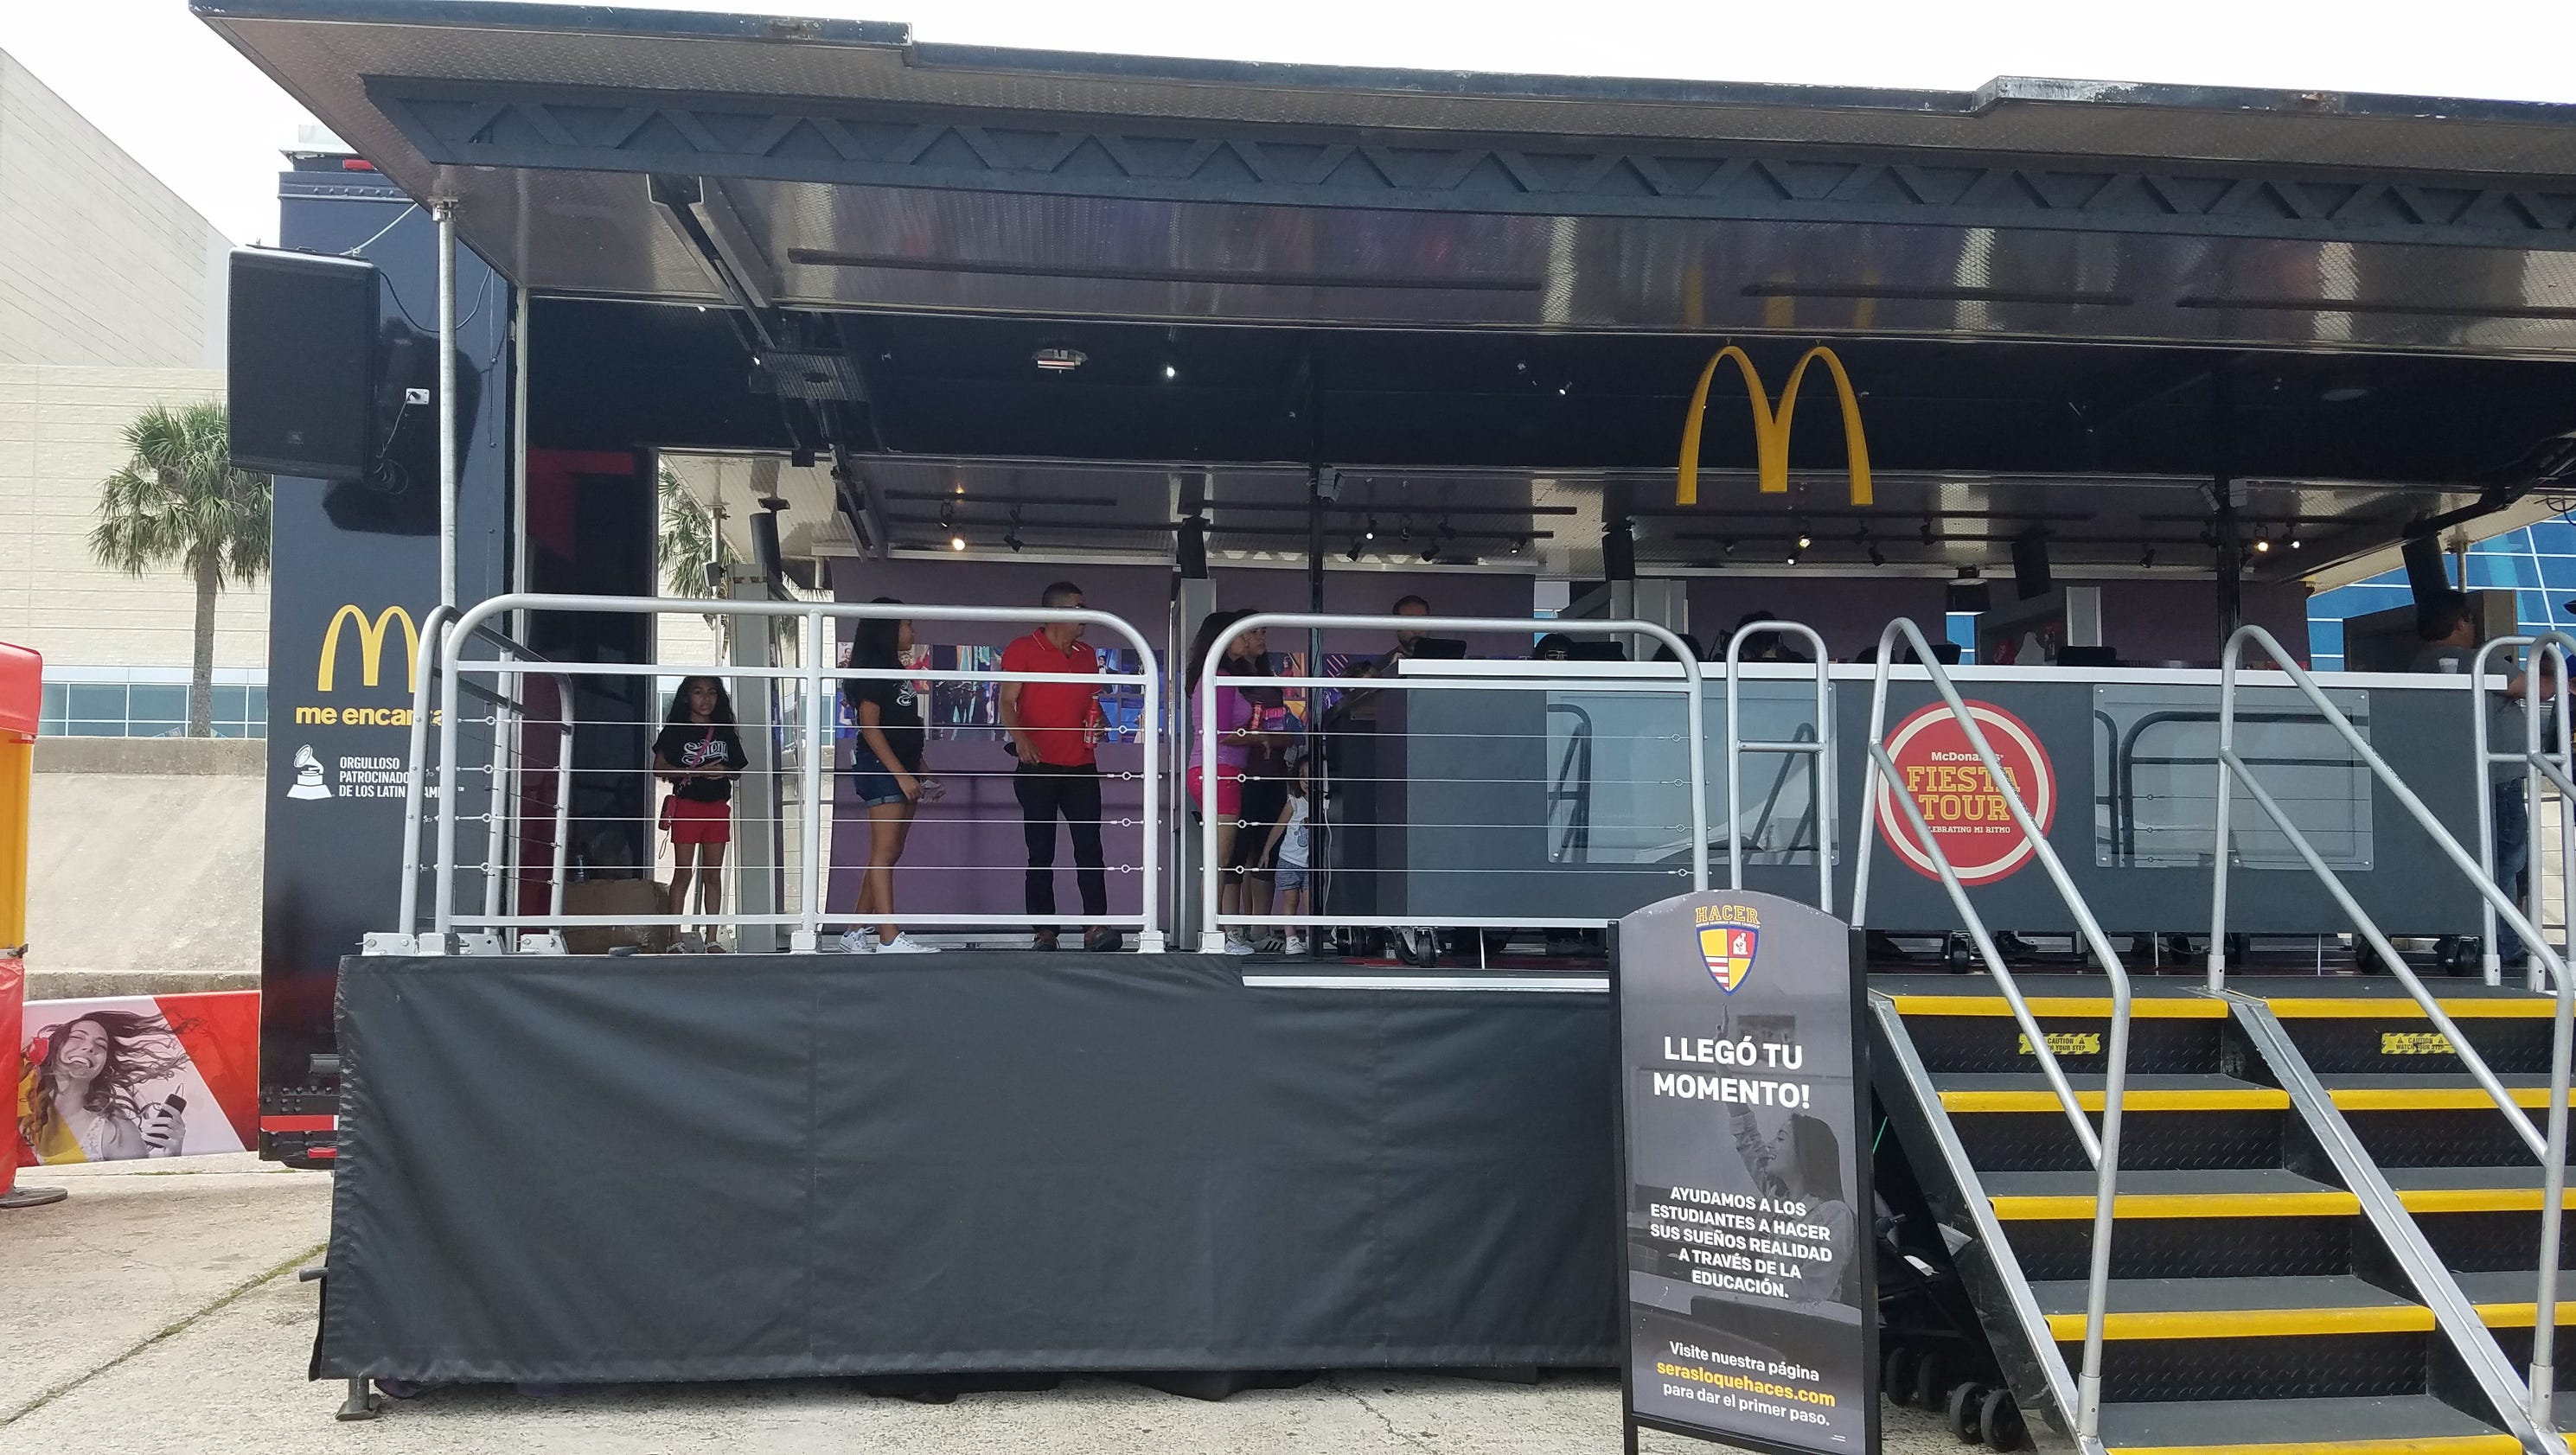 McDonald's Fiesta Tour hits educational high notes with visitors - Corpus Christi Caller-Times